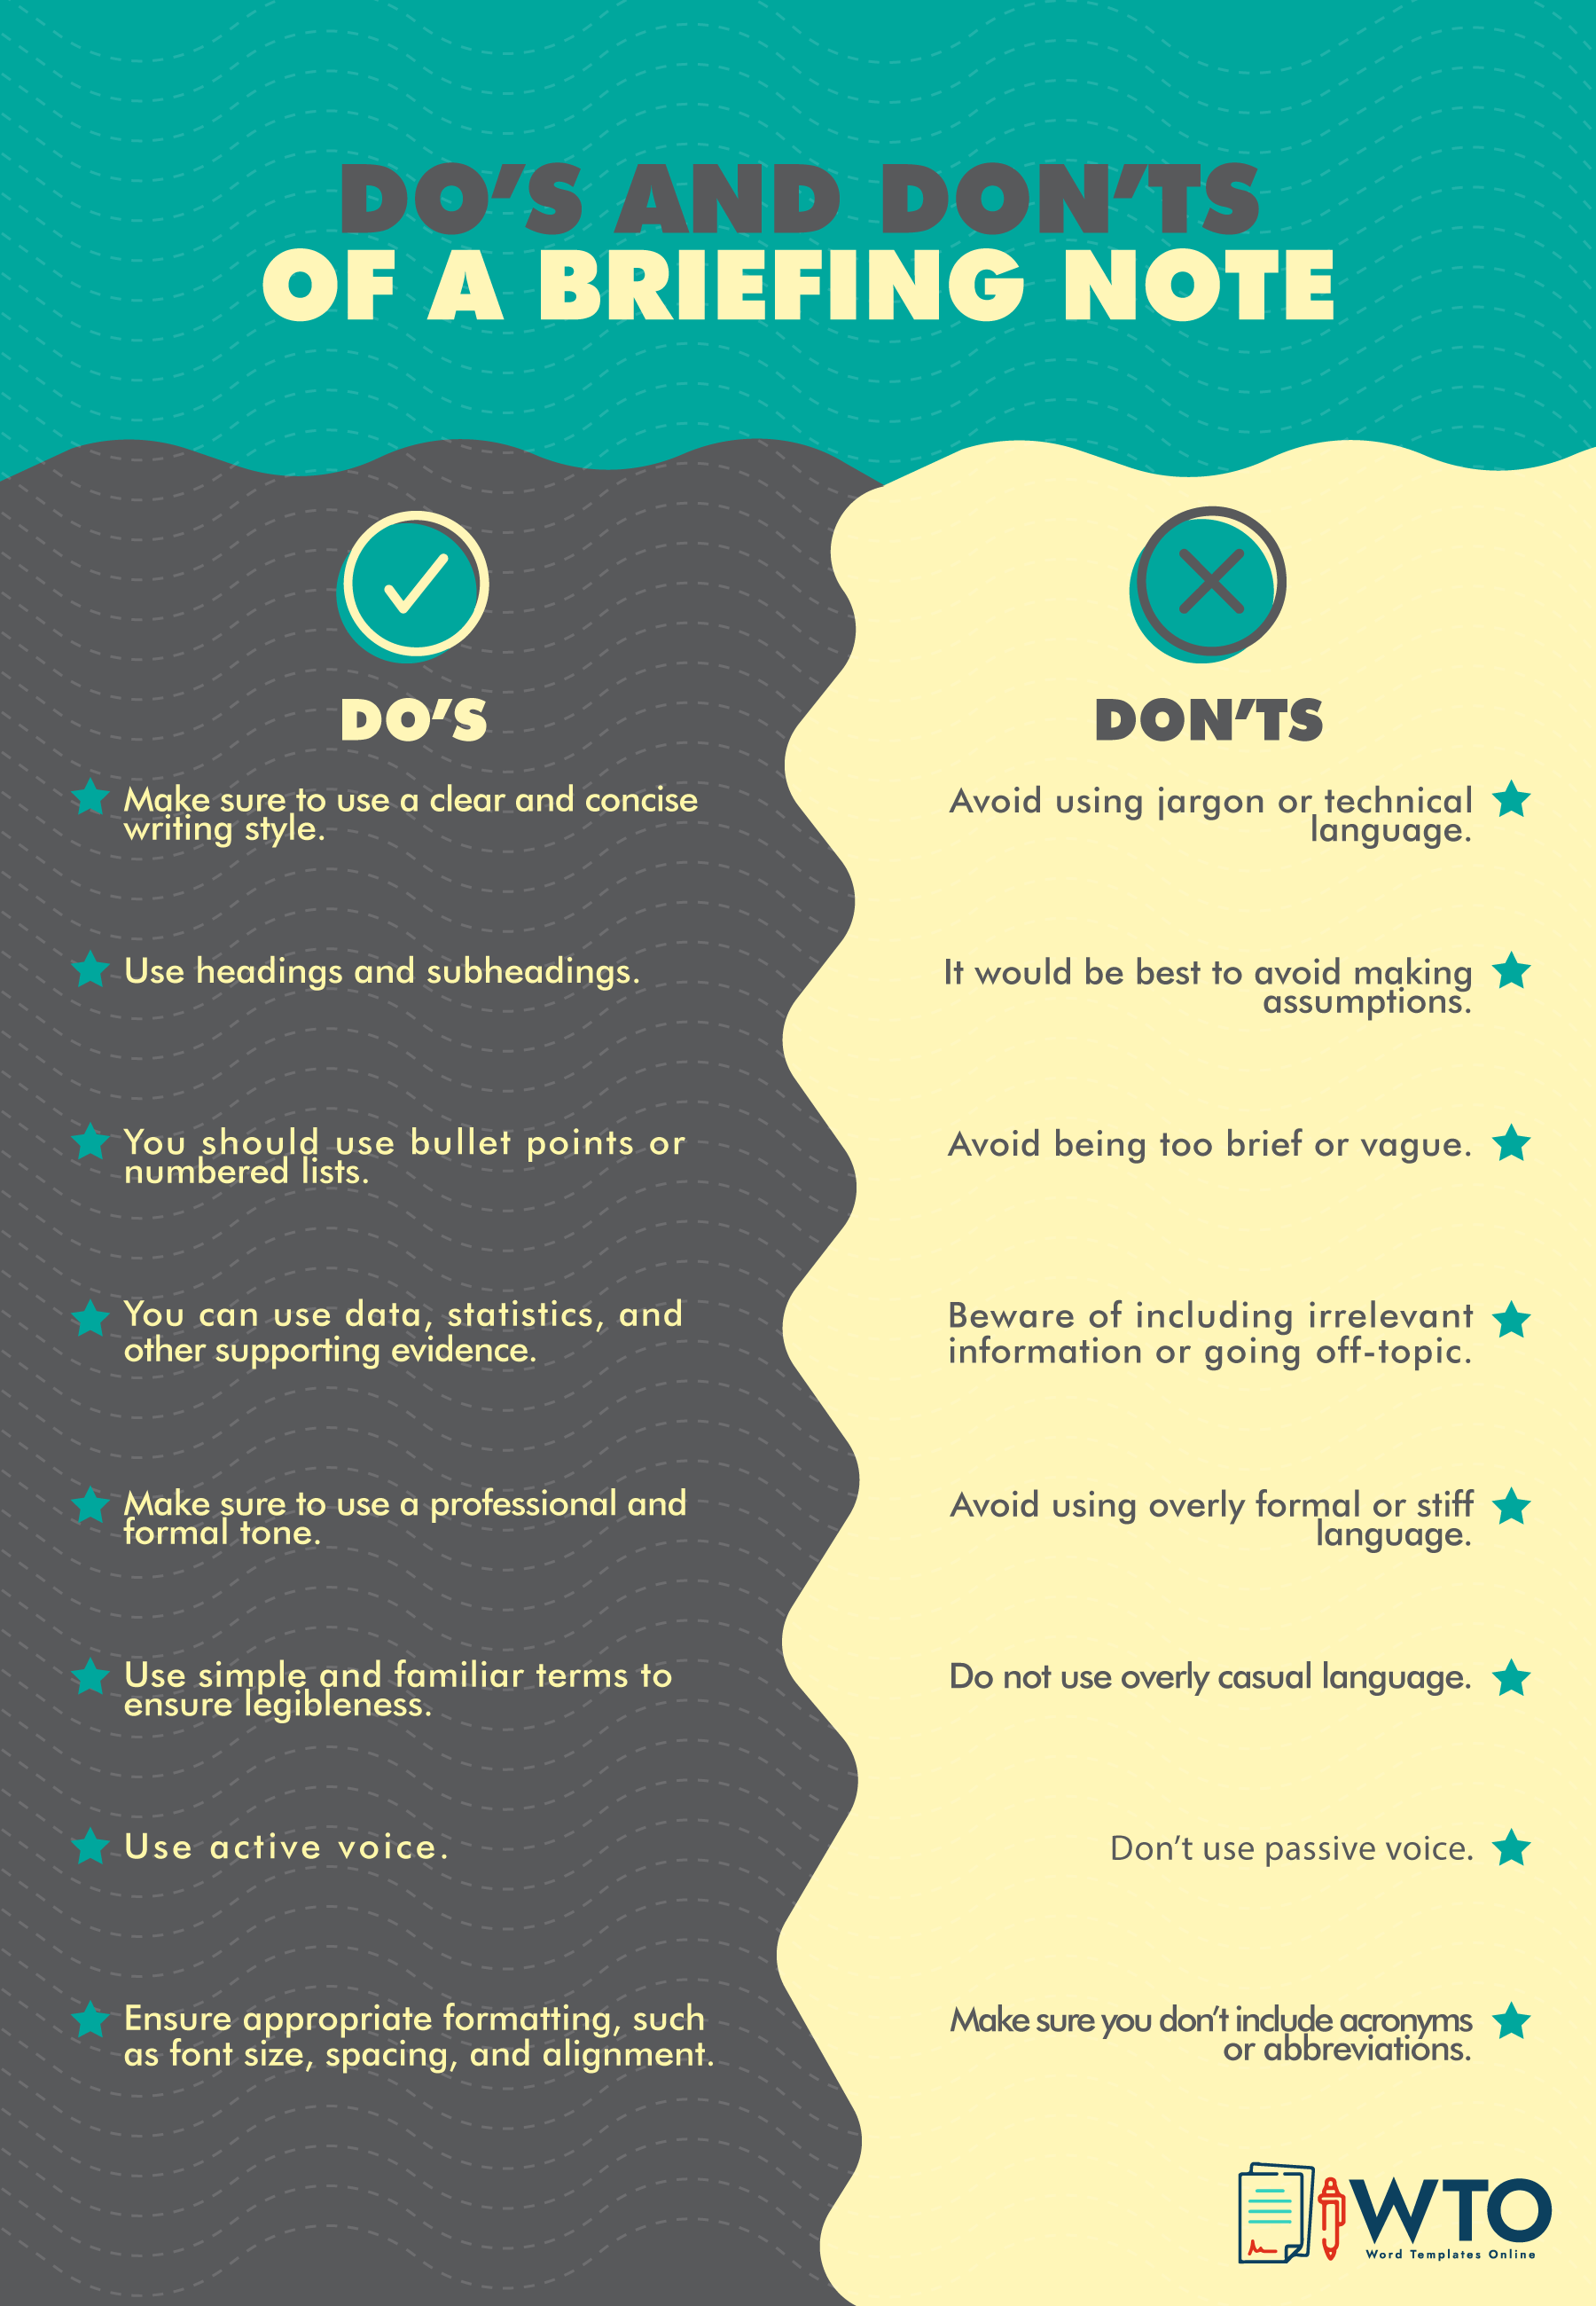 This infographic is about do's and don'ts of briefing note.